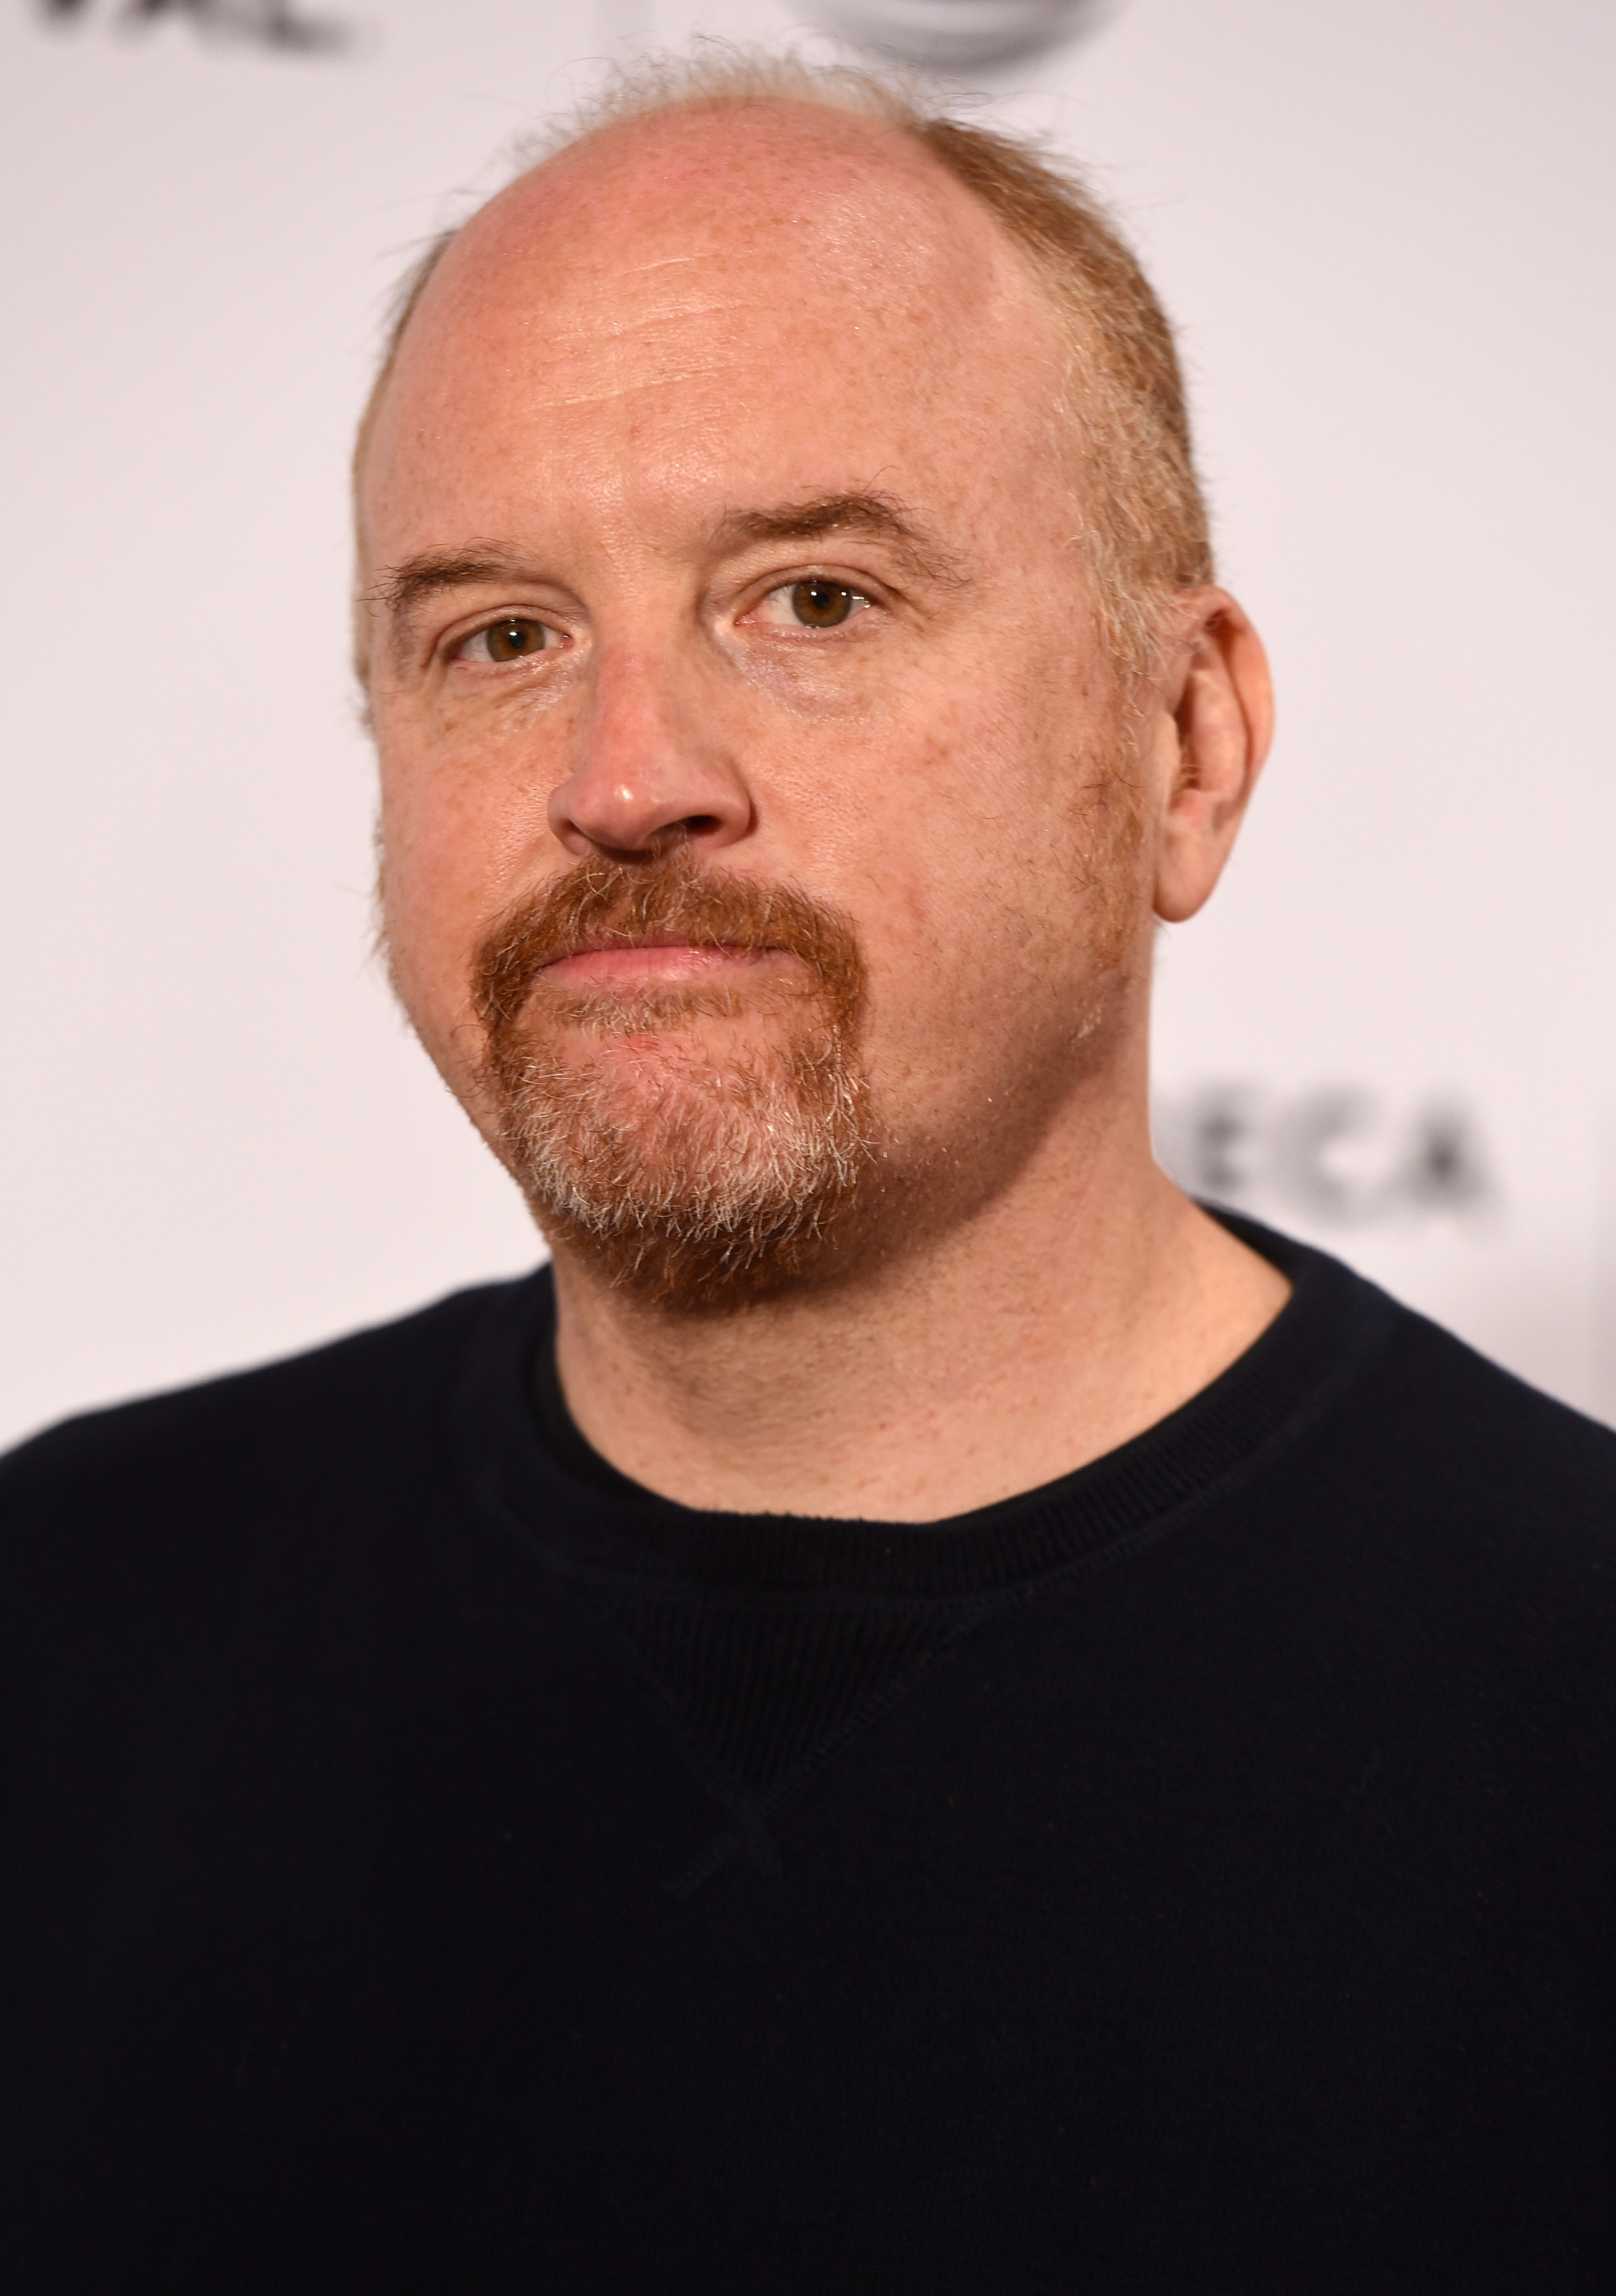 Louis C.K. attends the "Check It" Premiere during the 2016 Tribeca Film Festival at Chelsea Bow Tie Cinemas on April 16, 2016 in New York City.